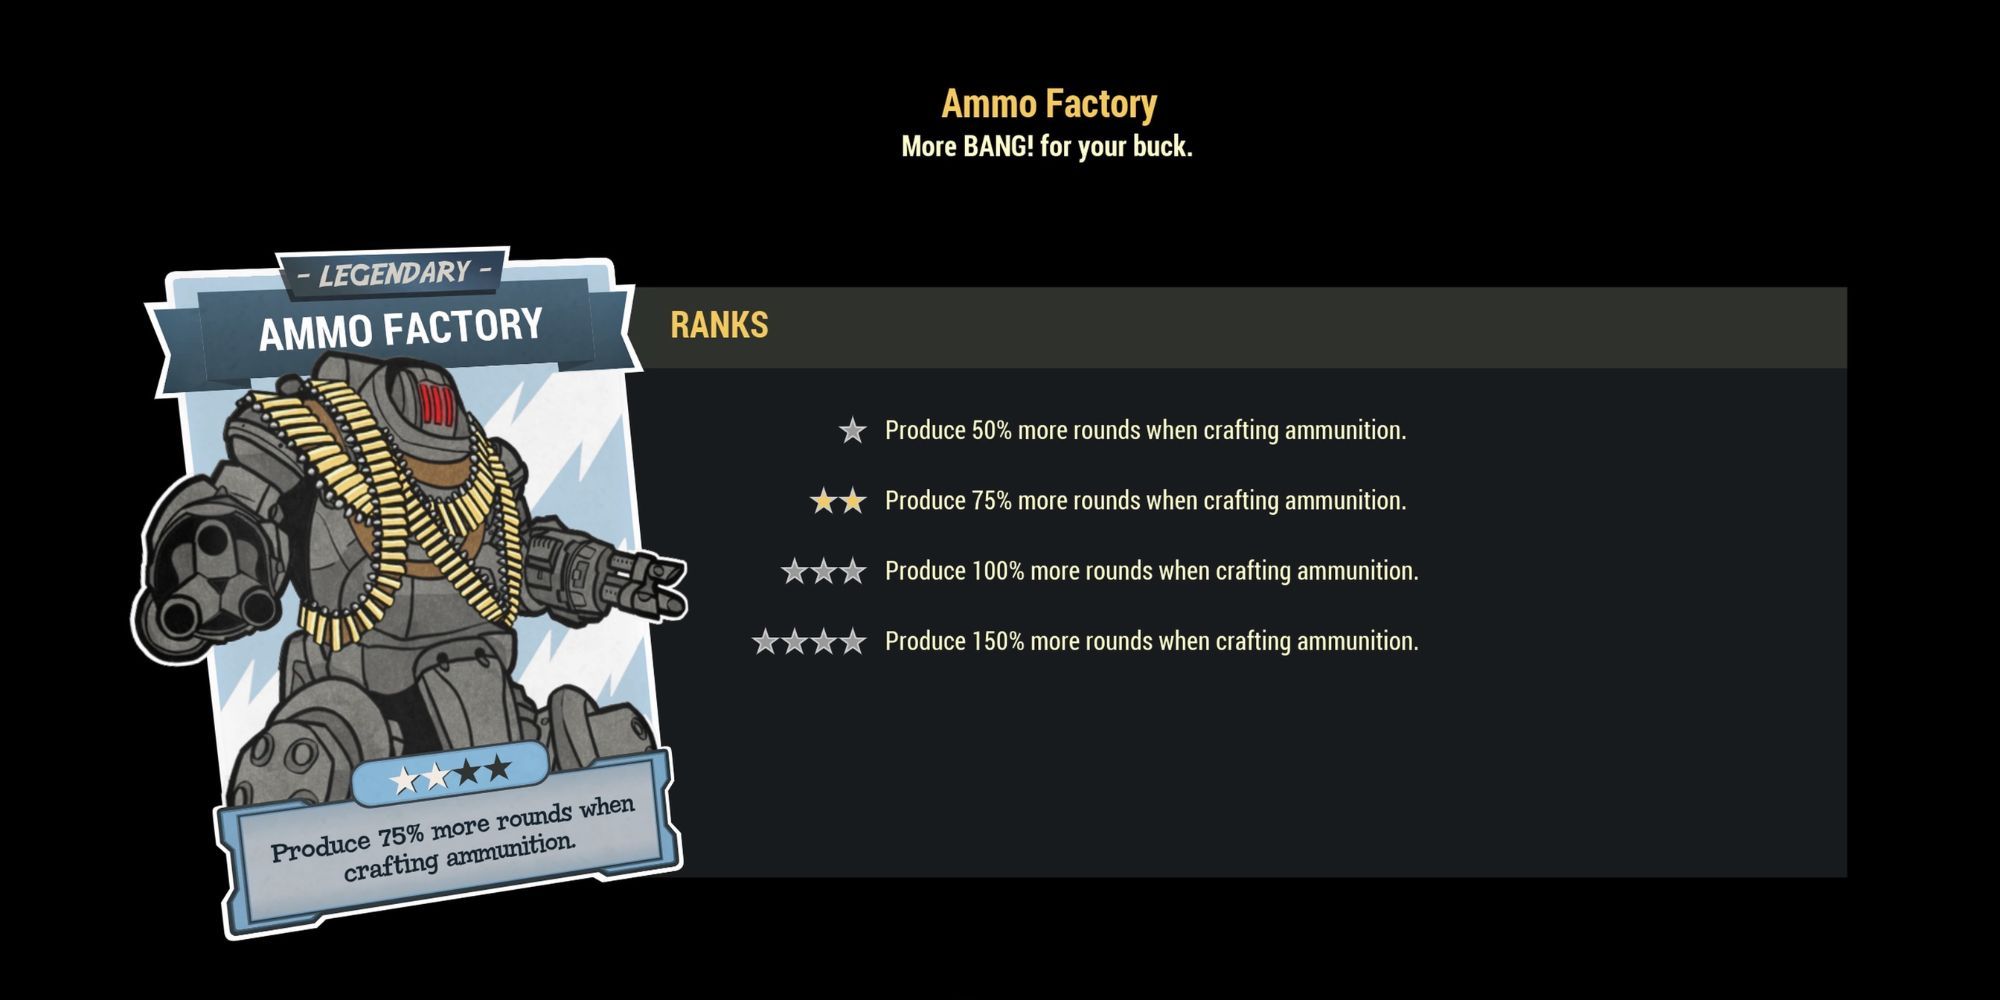 Legendary Ammo Factory Perk Fallout 76 Big robot with ammo bandolier atop of it 